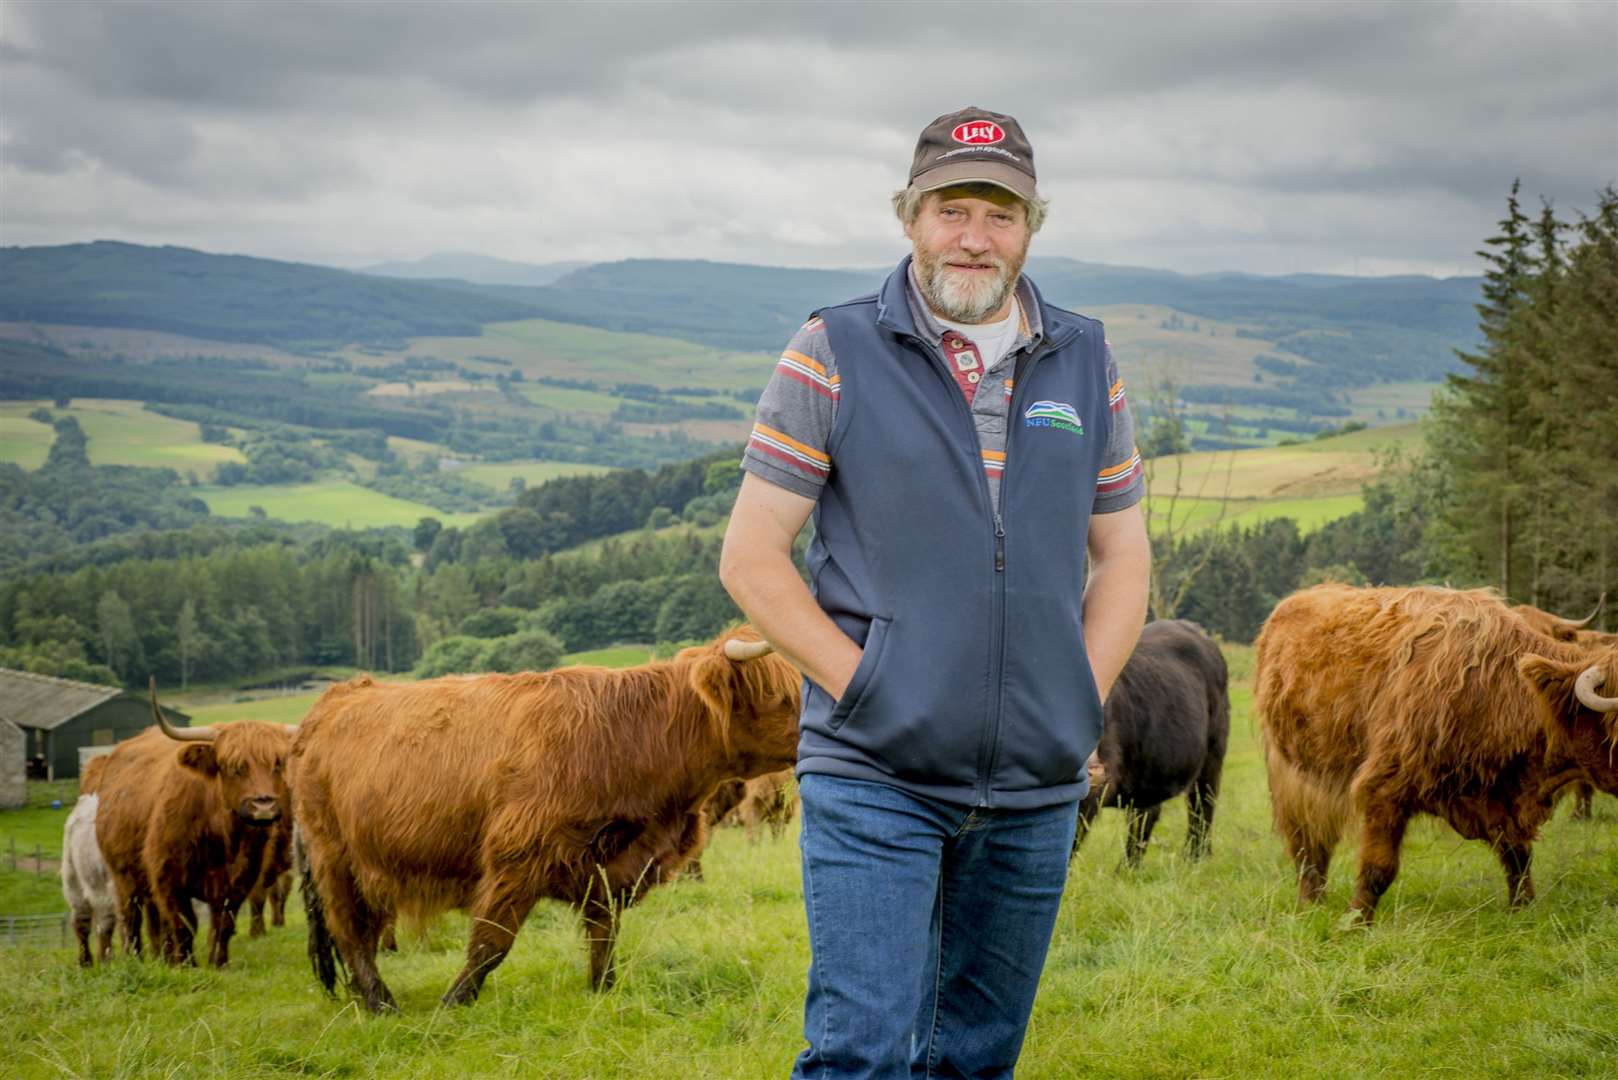 Martin Kennedy: 'Reductions in agricultural production on this scale, if replicated across our whole industry, will have significant ramifications for our food and drink sector and all those businesses upstream and downstream who rely on farmers and crofters.' Picture: Ian R Fleming/NFU Scotland